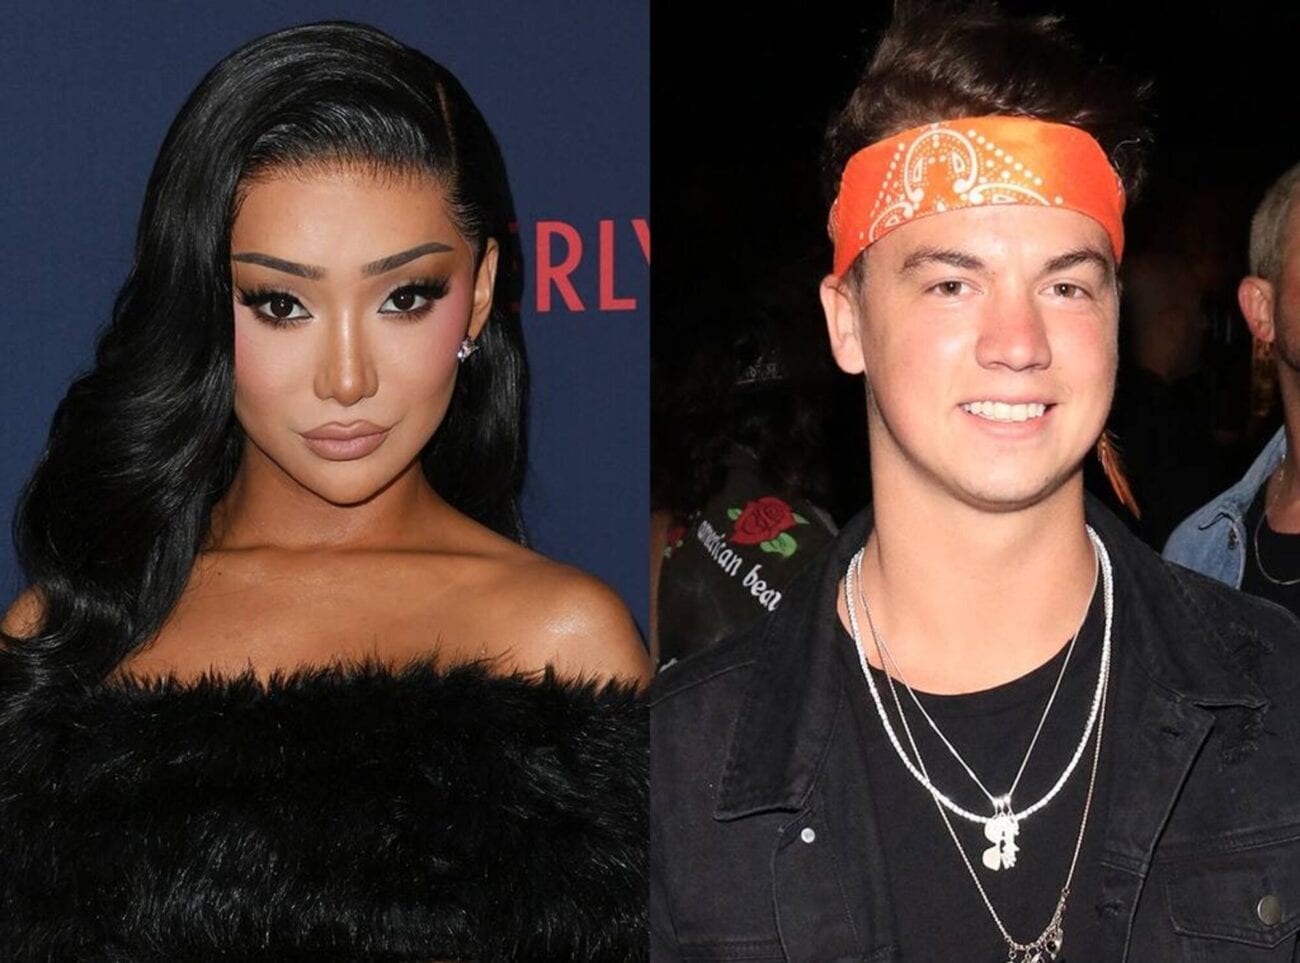 Taylor Caniff has been under fire recently for misgendering Nikita Dragun and referring to her as a boy. Take a look at the awful incident now.